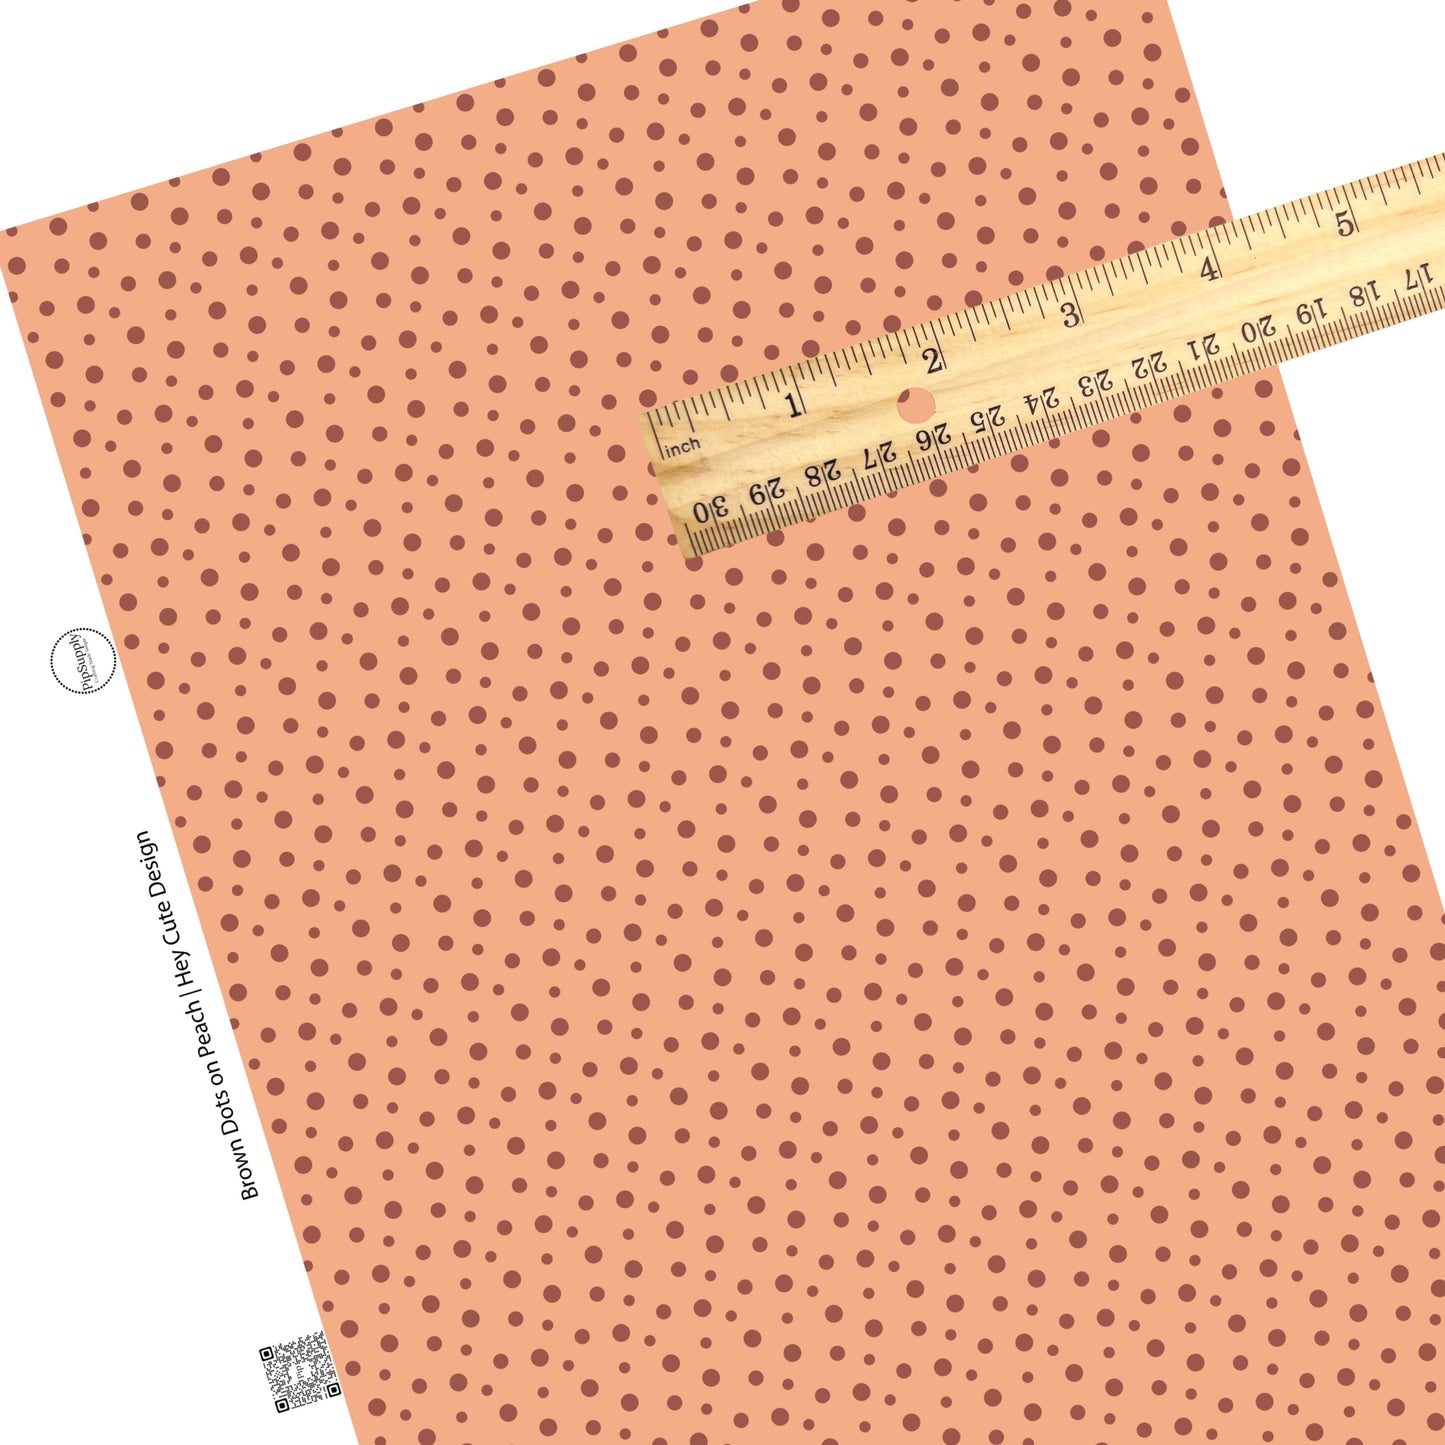 These dot themed light orange faux leather sheets contain the following design elements: small dark orange and brown dots on light peach.